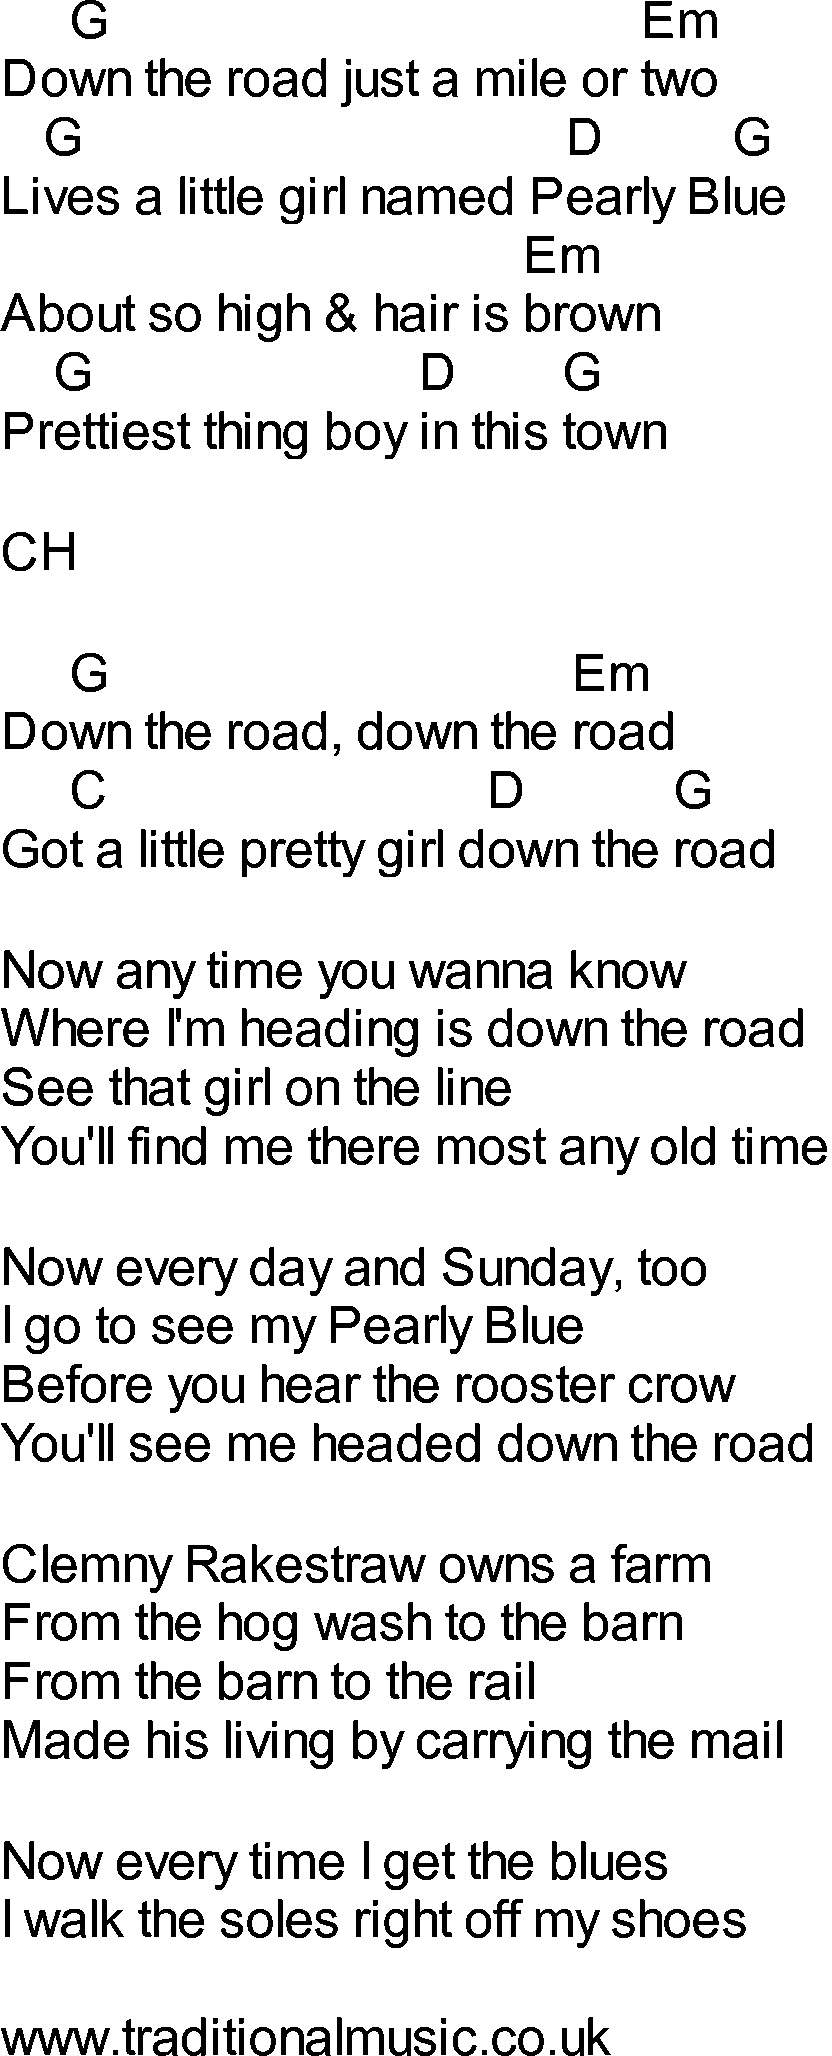 Bluegrass songs with chords - Down The Road